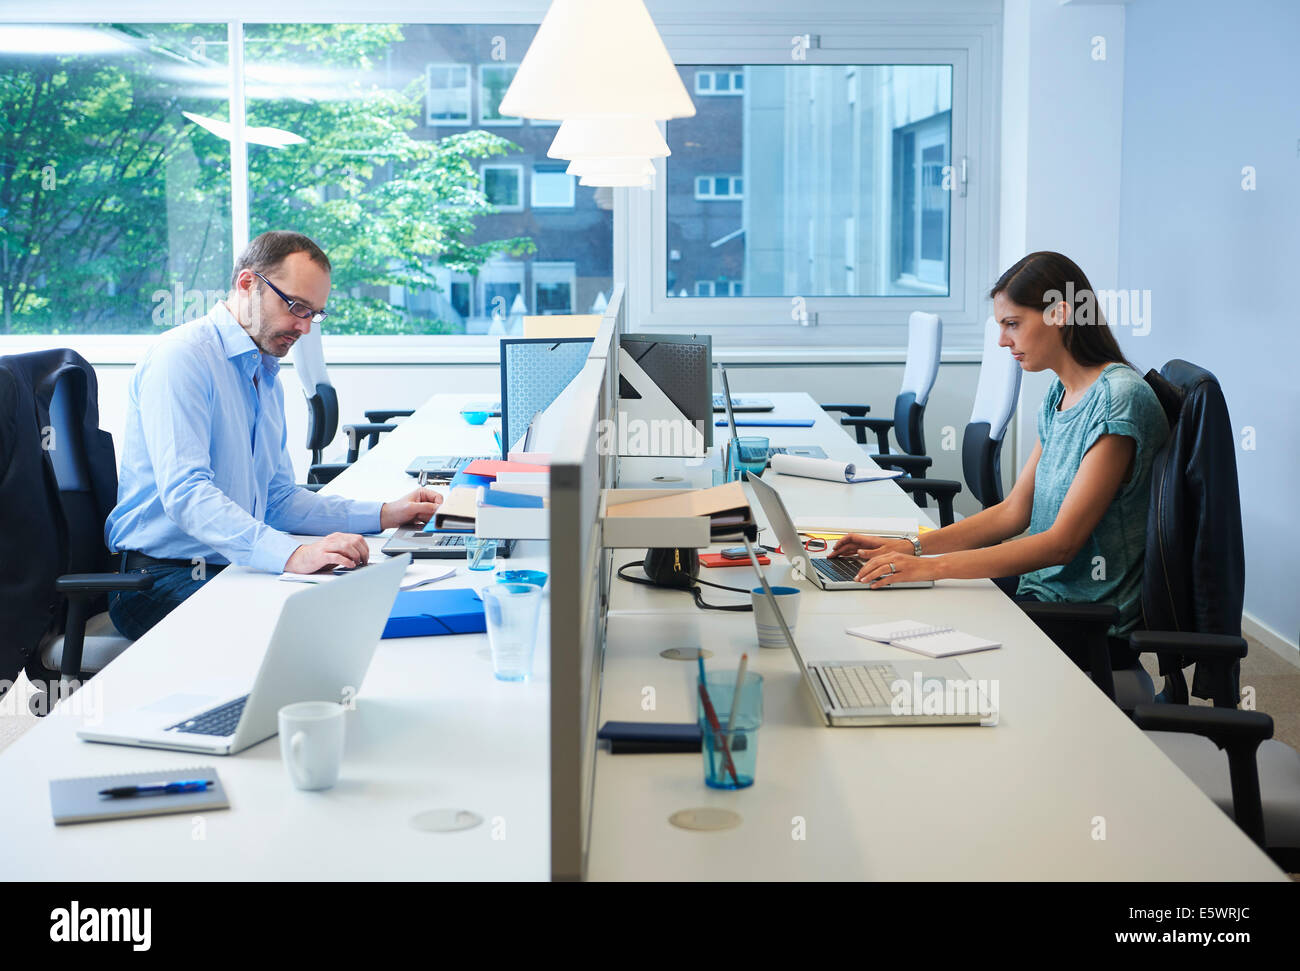 Colleagues working on either side of desk partition Stock Photo